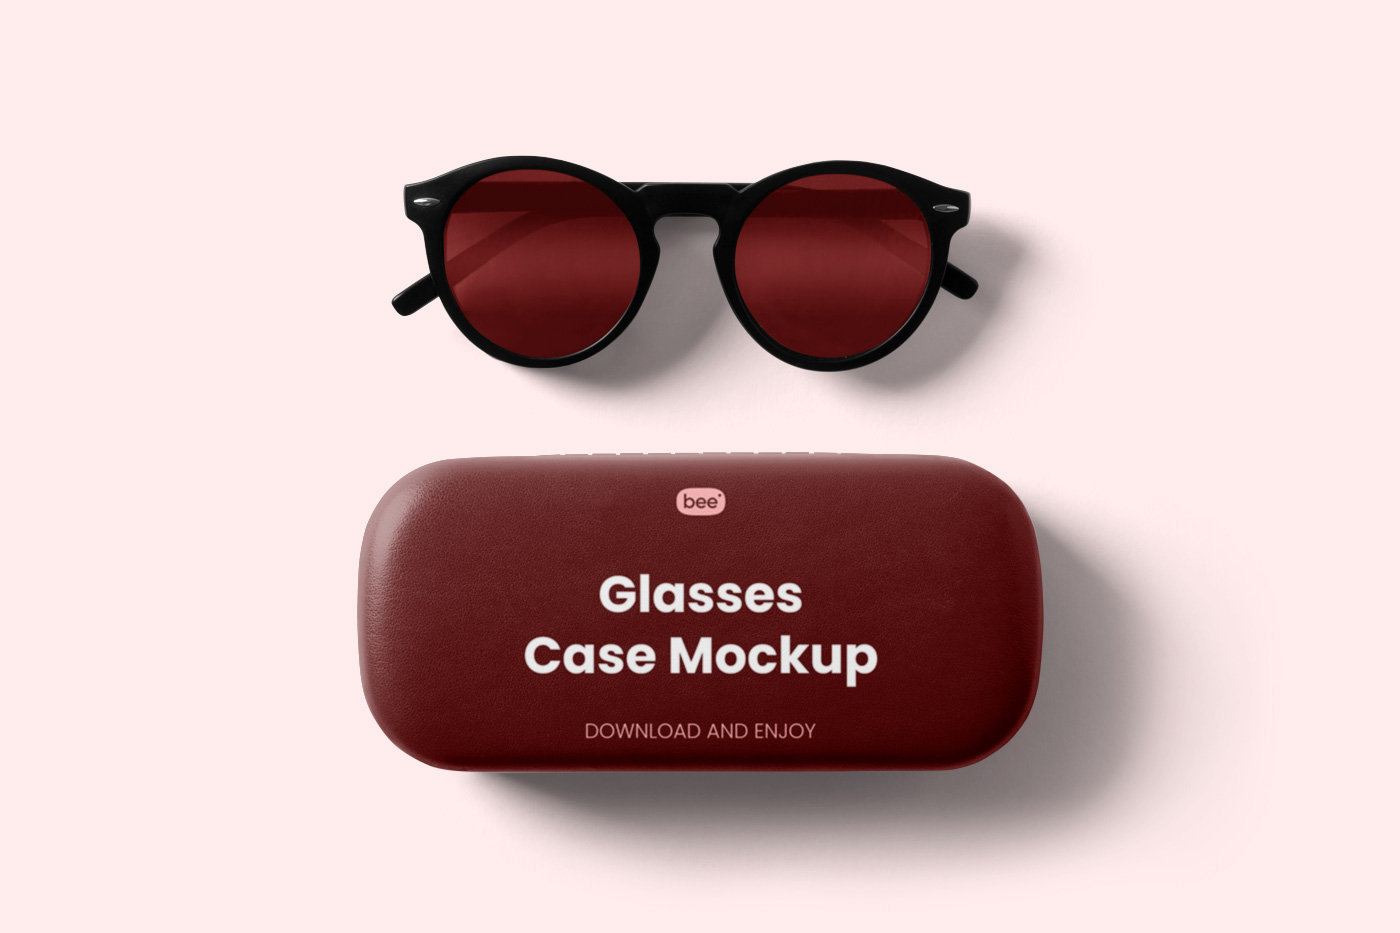 Top Sight of Glasses Case Mockup with Sunglasses